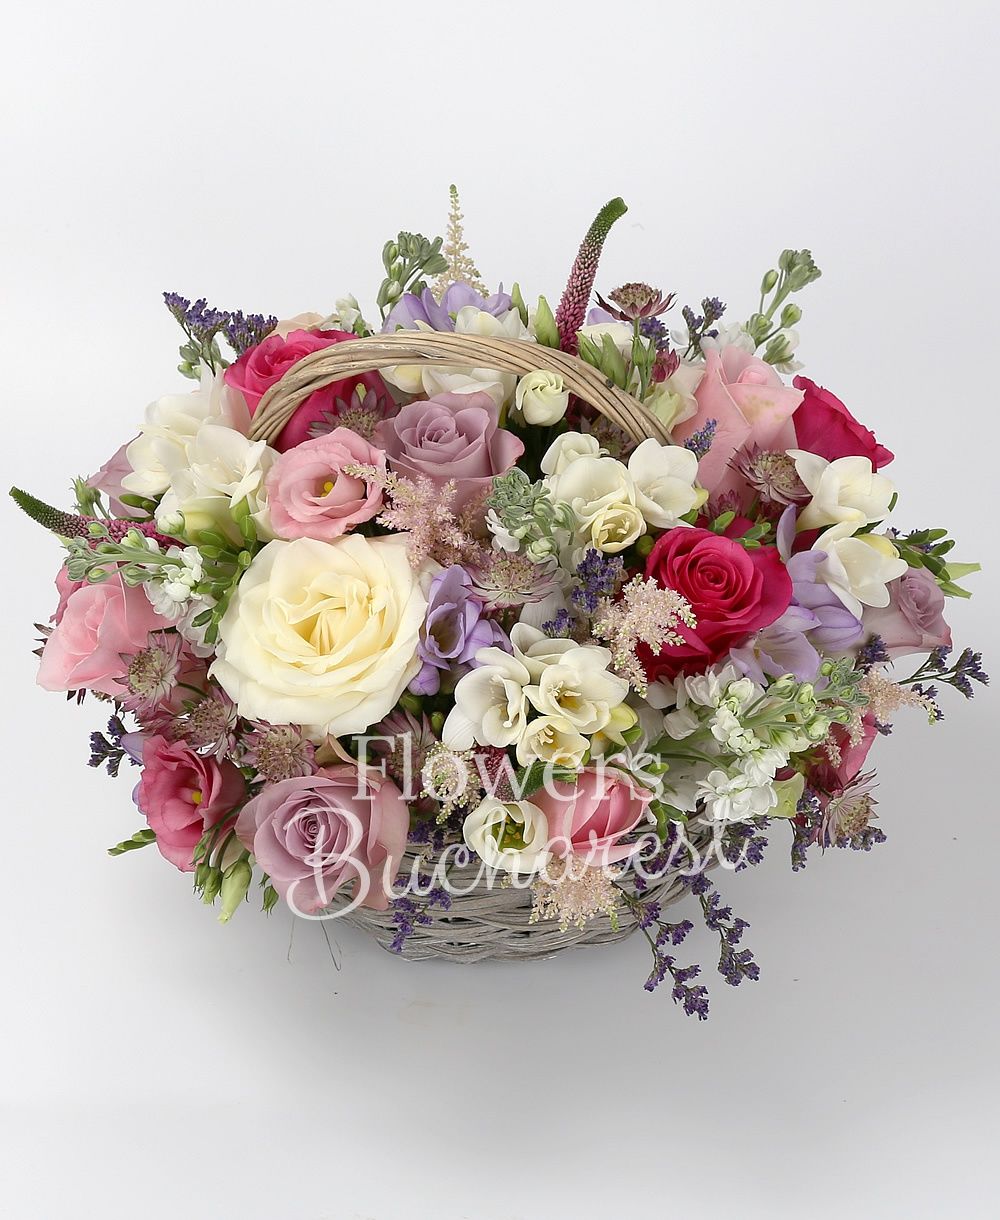 3 cyclam roses, 5 purple roses, 3 white roses, 2 pink roses, 5 yellow freesias, 5 purple freesias, 5 white matthiola, 3 pink lisianthus, 2 cream miniroses, 5 pink veronica, 5 pink astilbe, greenery